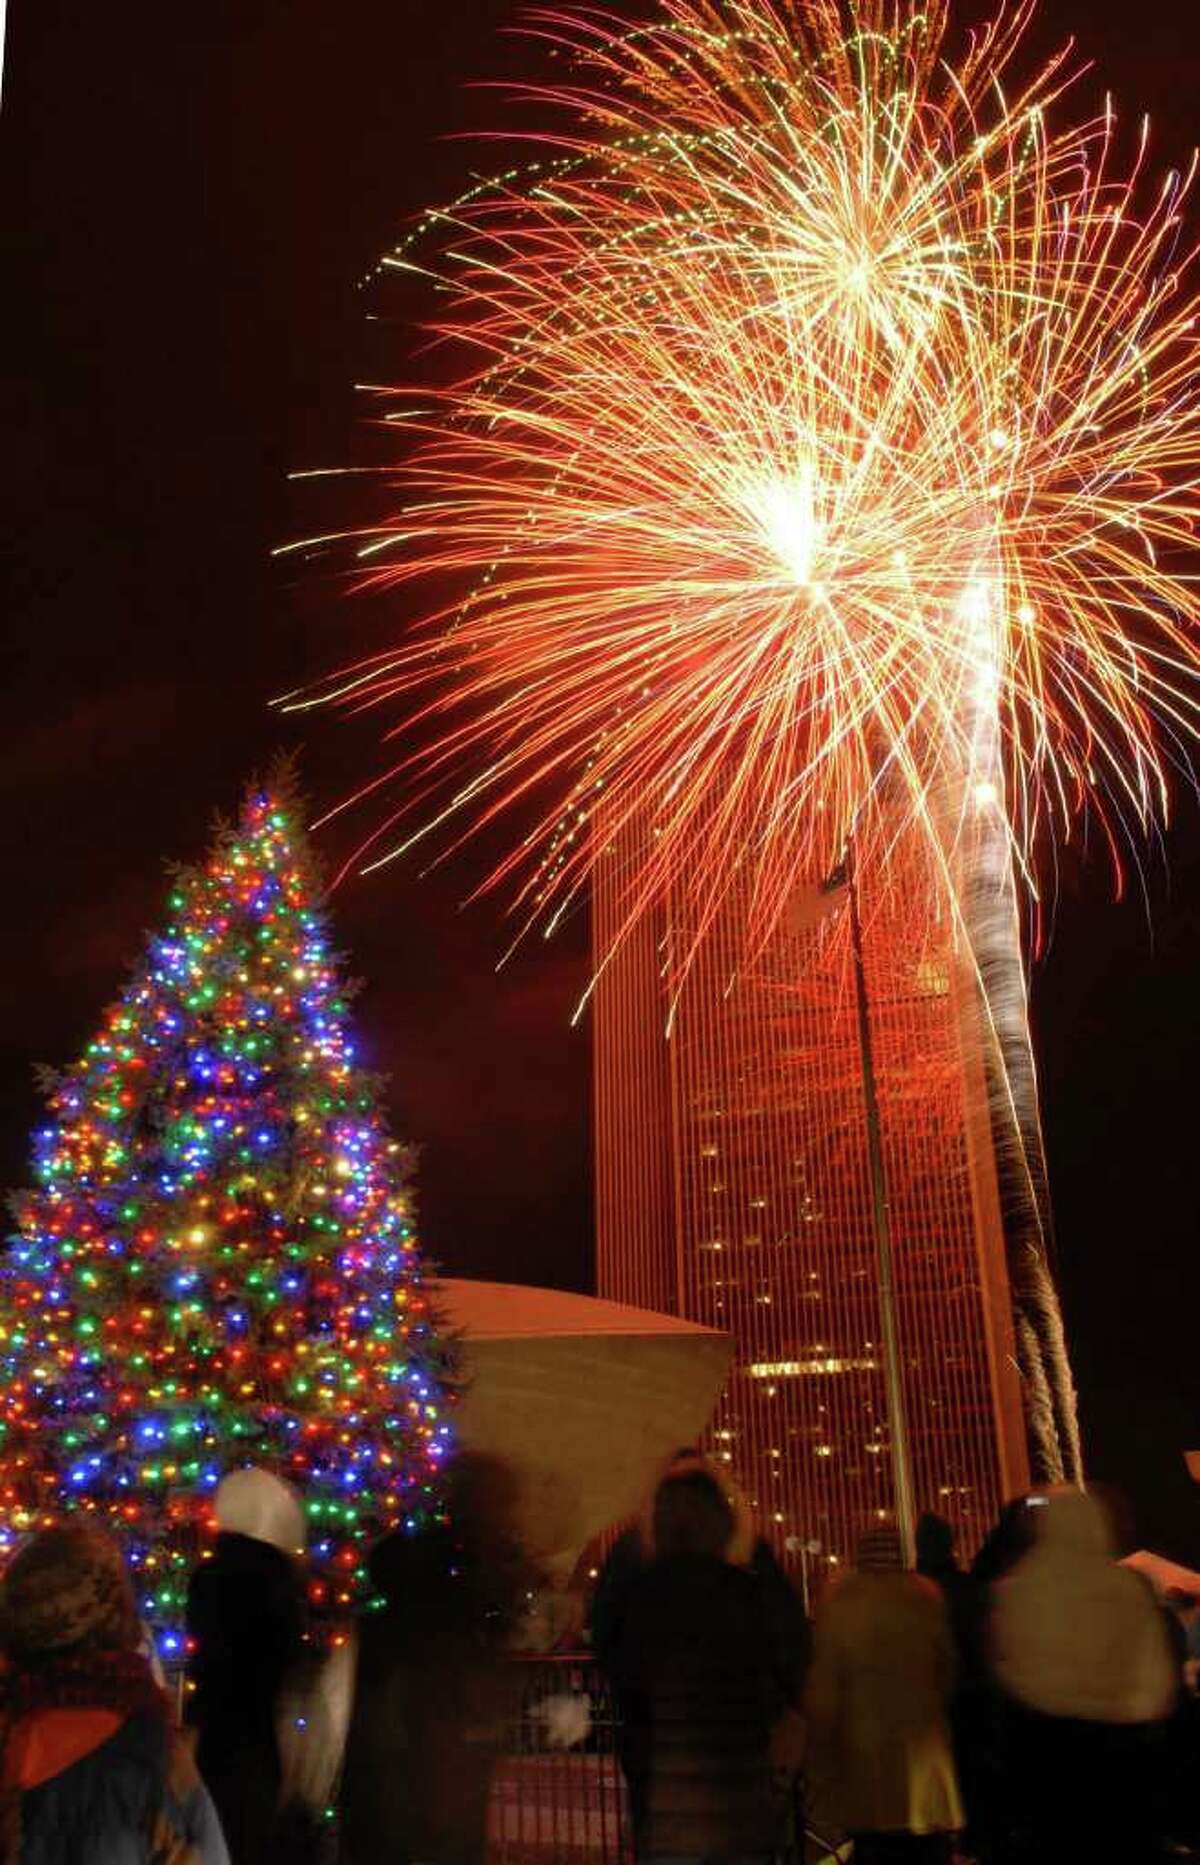 Just as the New York State Tree lights up with more than 2,000 energy-efficient light-emitting diodes, the crowd at Empire State Plaza was treated to a fireworks display to honor the holiday tree-lighting on Sunday, Dec. 5, 2010, in Albany, NY. (Luanne M. Ferris / Times Union )